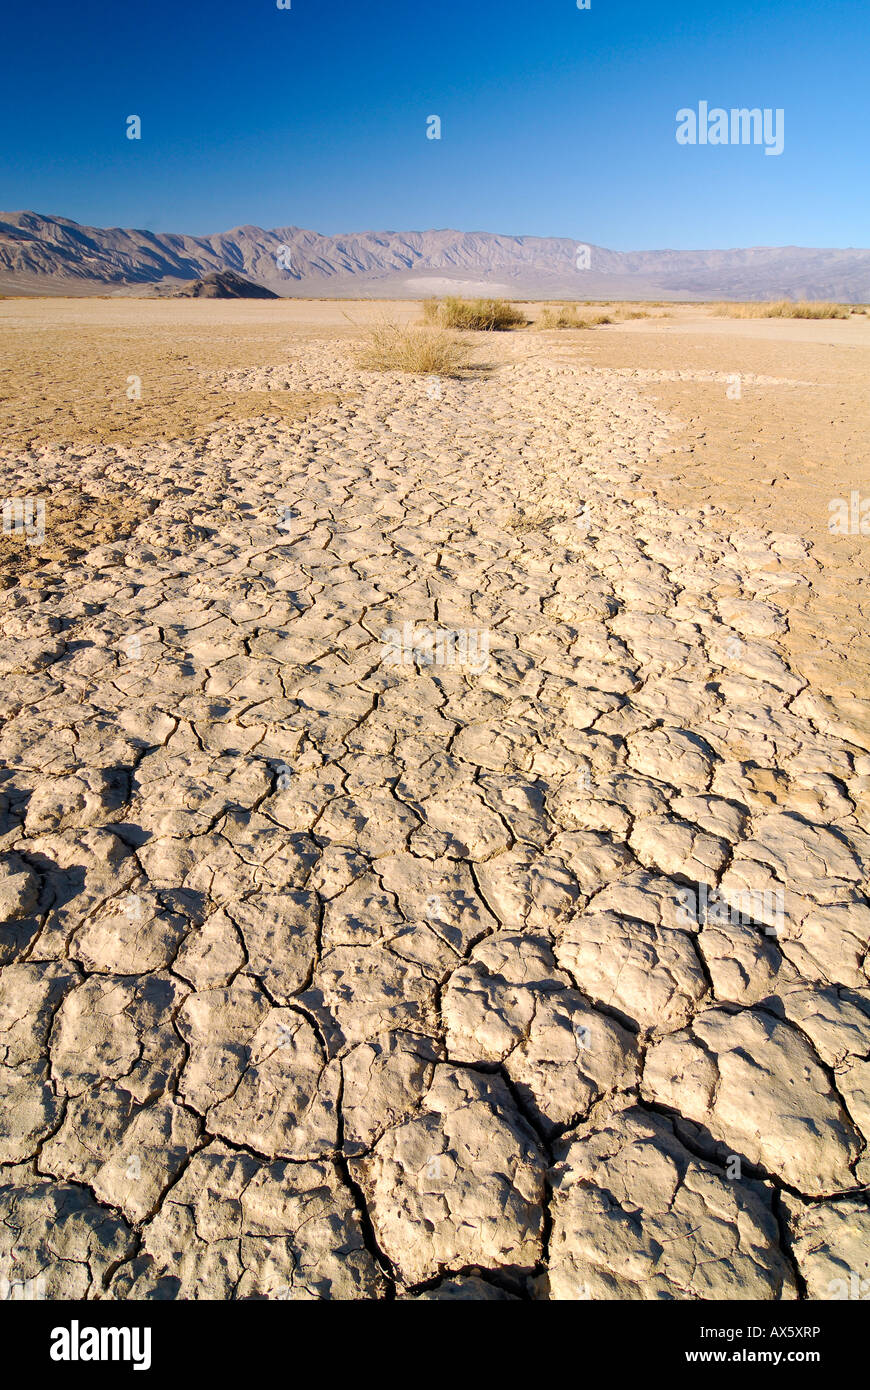 Desiccation cracks, arid loam soil at Stovepipe Wells in Death Valley National Park, California, USA, North America Stock Photo